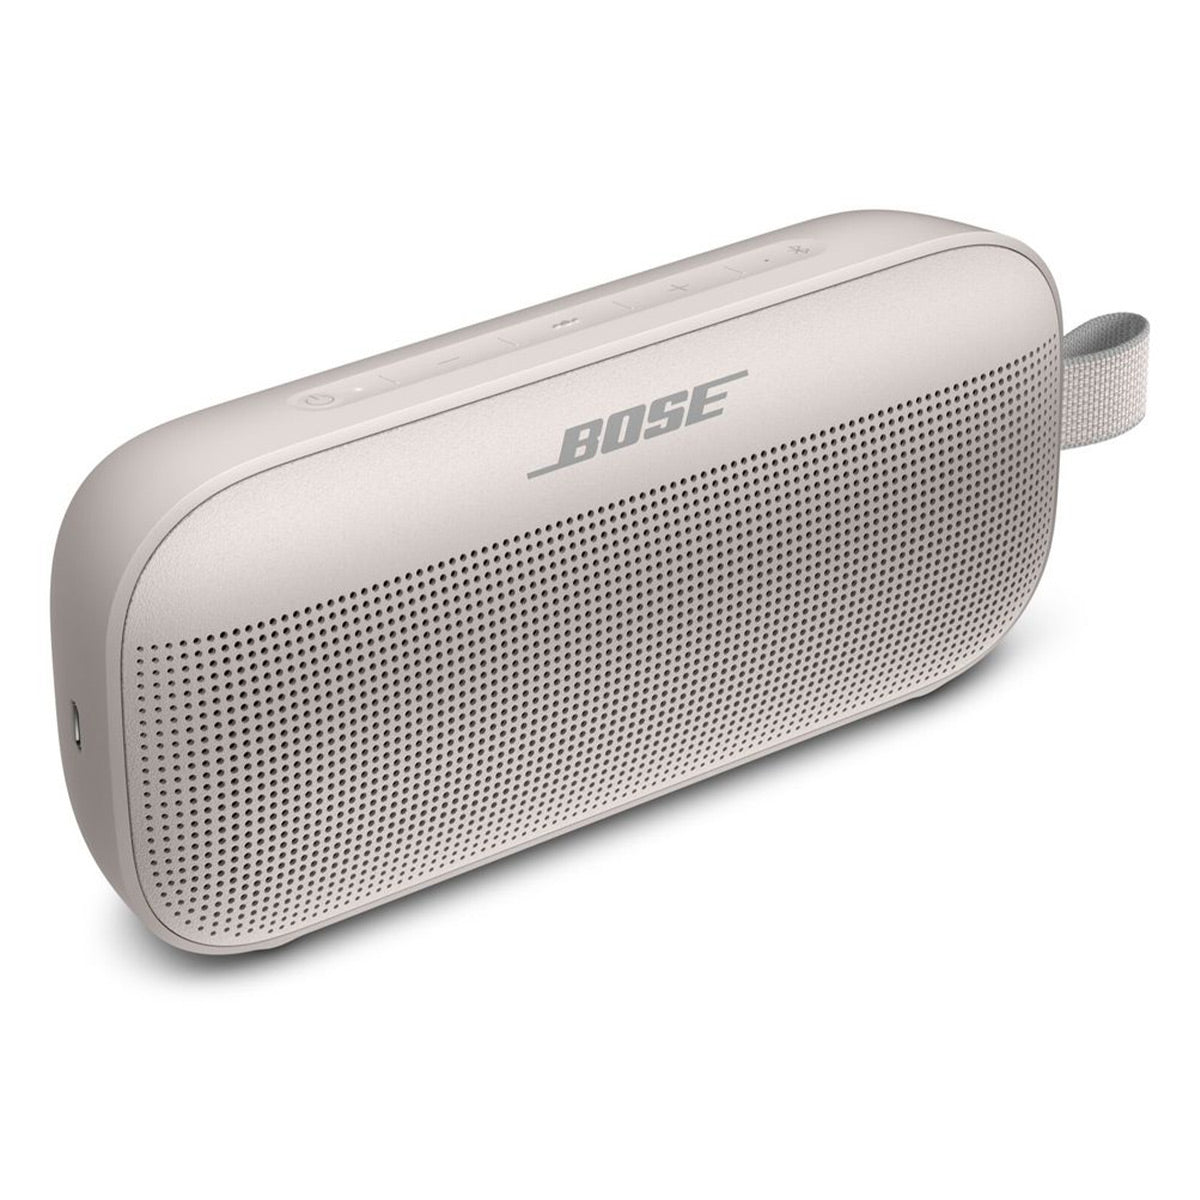 Bose QuietComfort Earbuds Noise (Soapstone) Wireless (White Stereo Wide Bose | Cancellation Portable with Smoke) Personalized World II True Speaker Flex and SoundLink Bluetooth